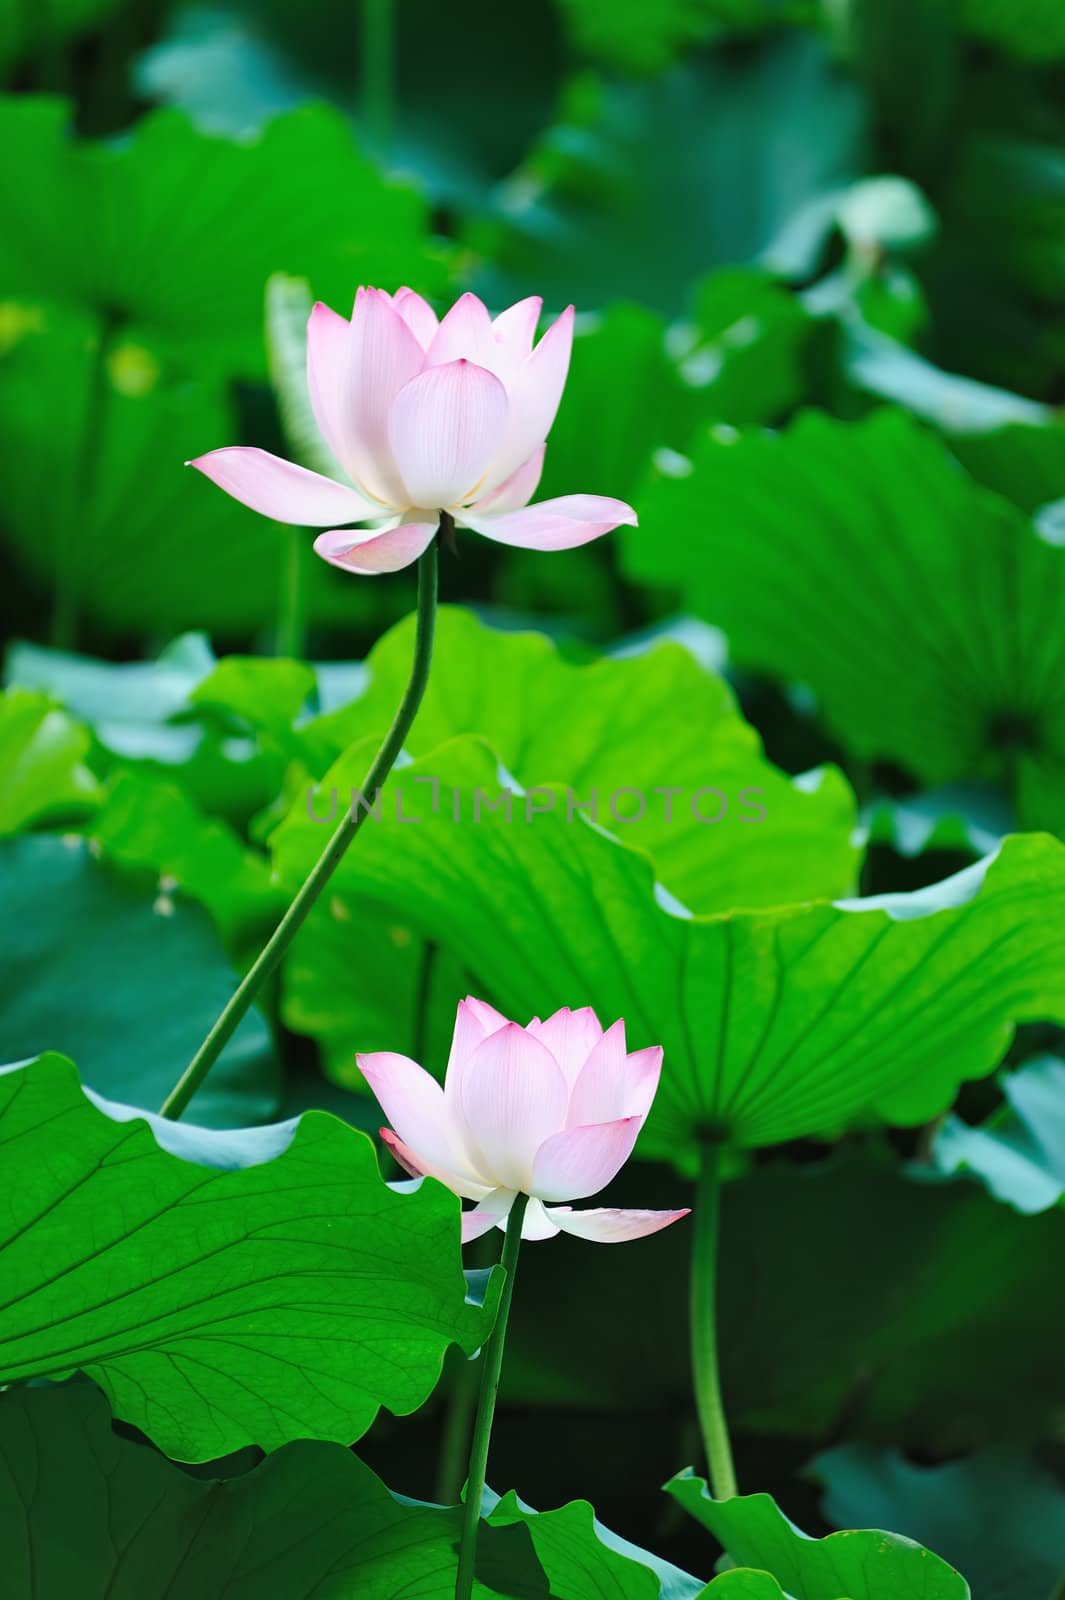 Two Lotus flowers by raywoo